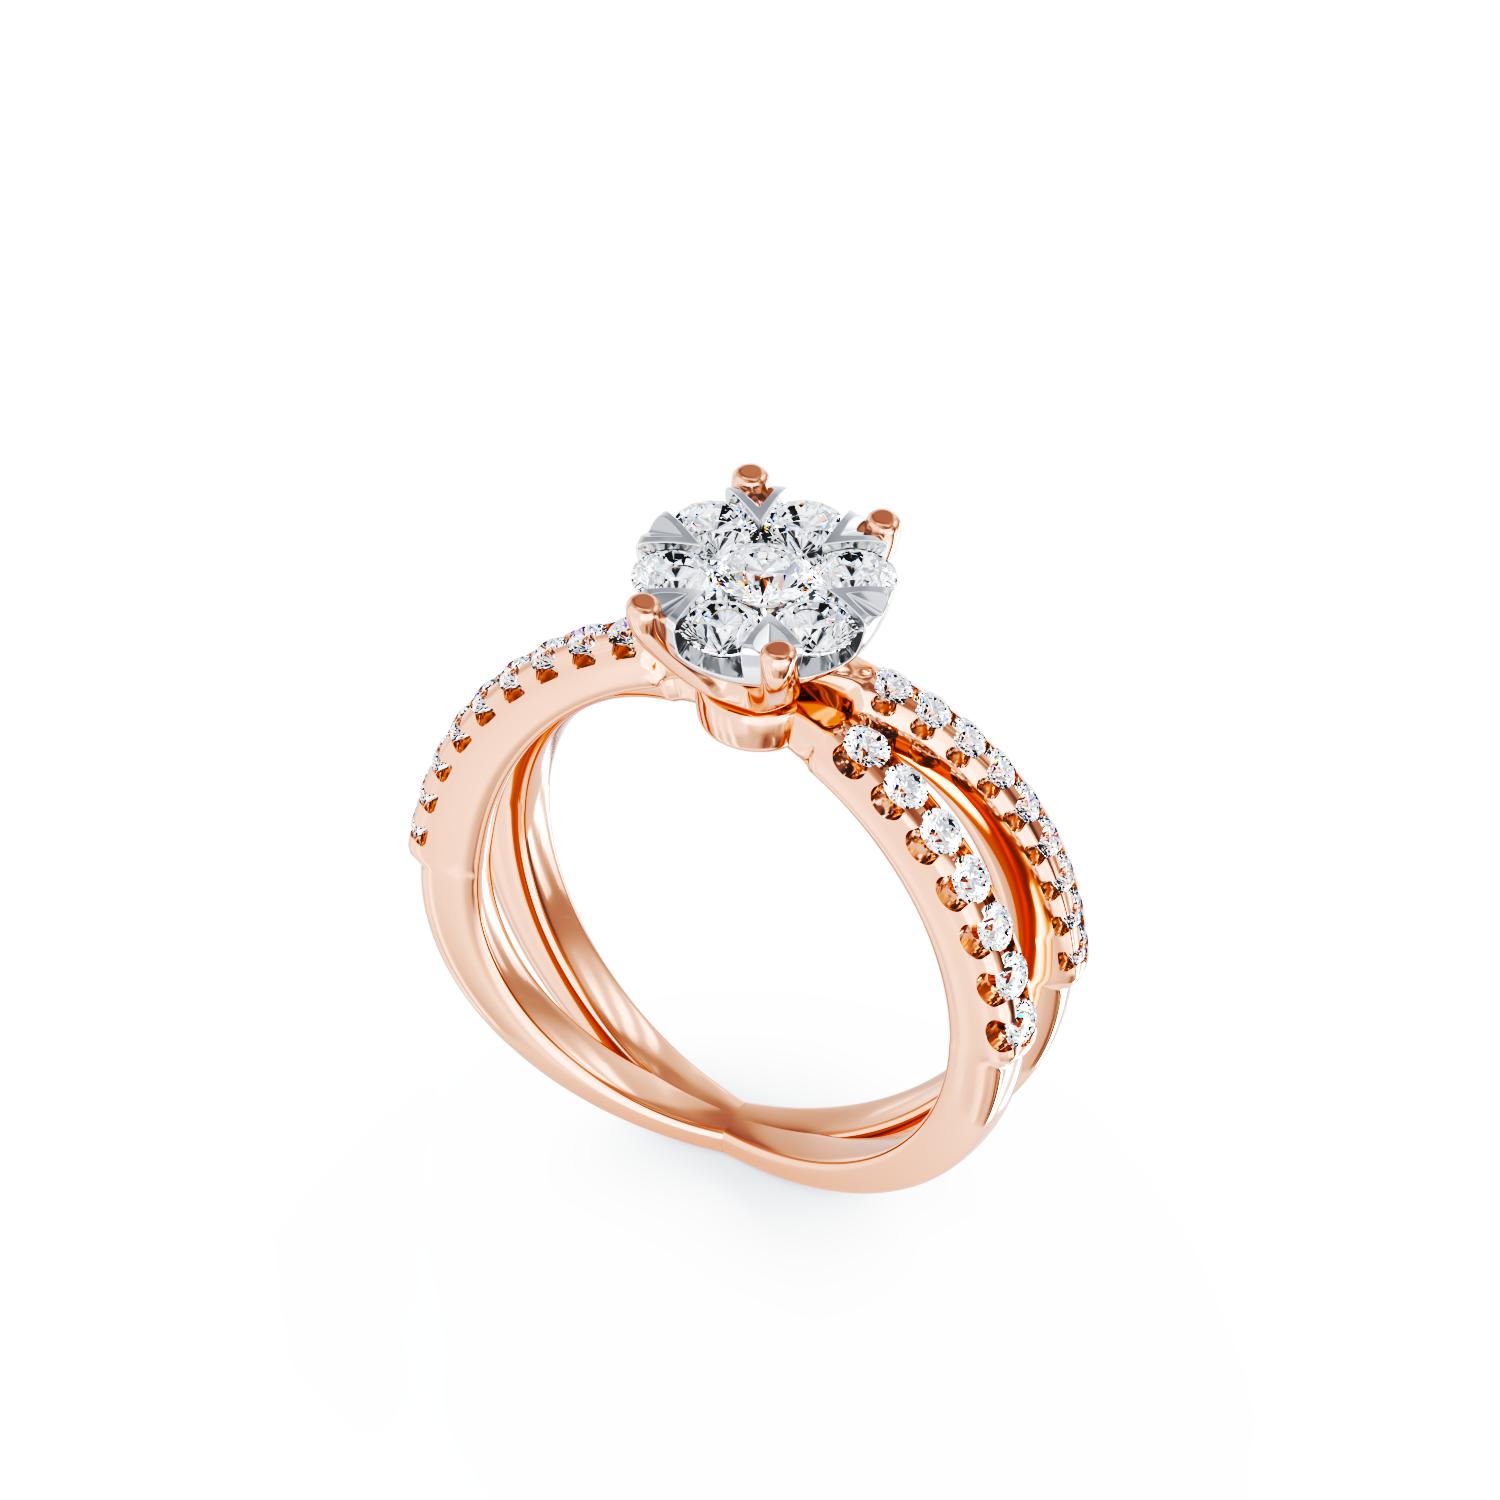 18K rose gold engagement ring with 0.6ct diamonds